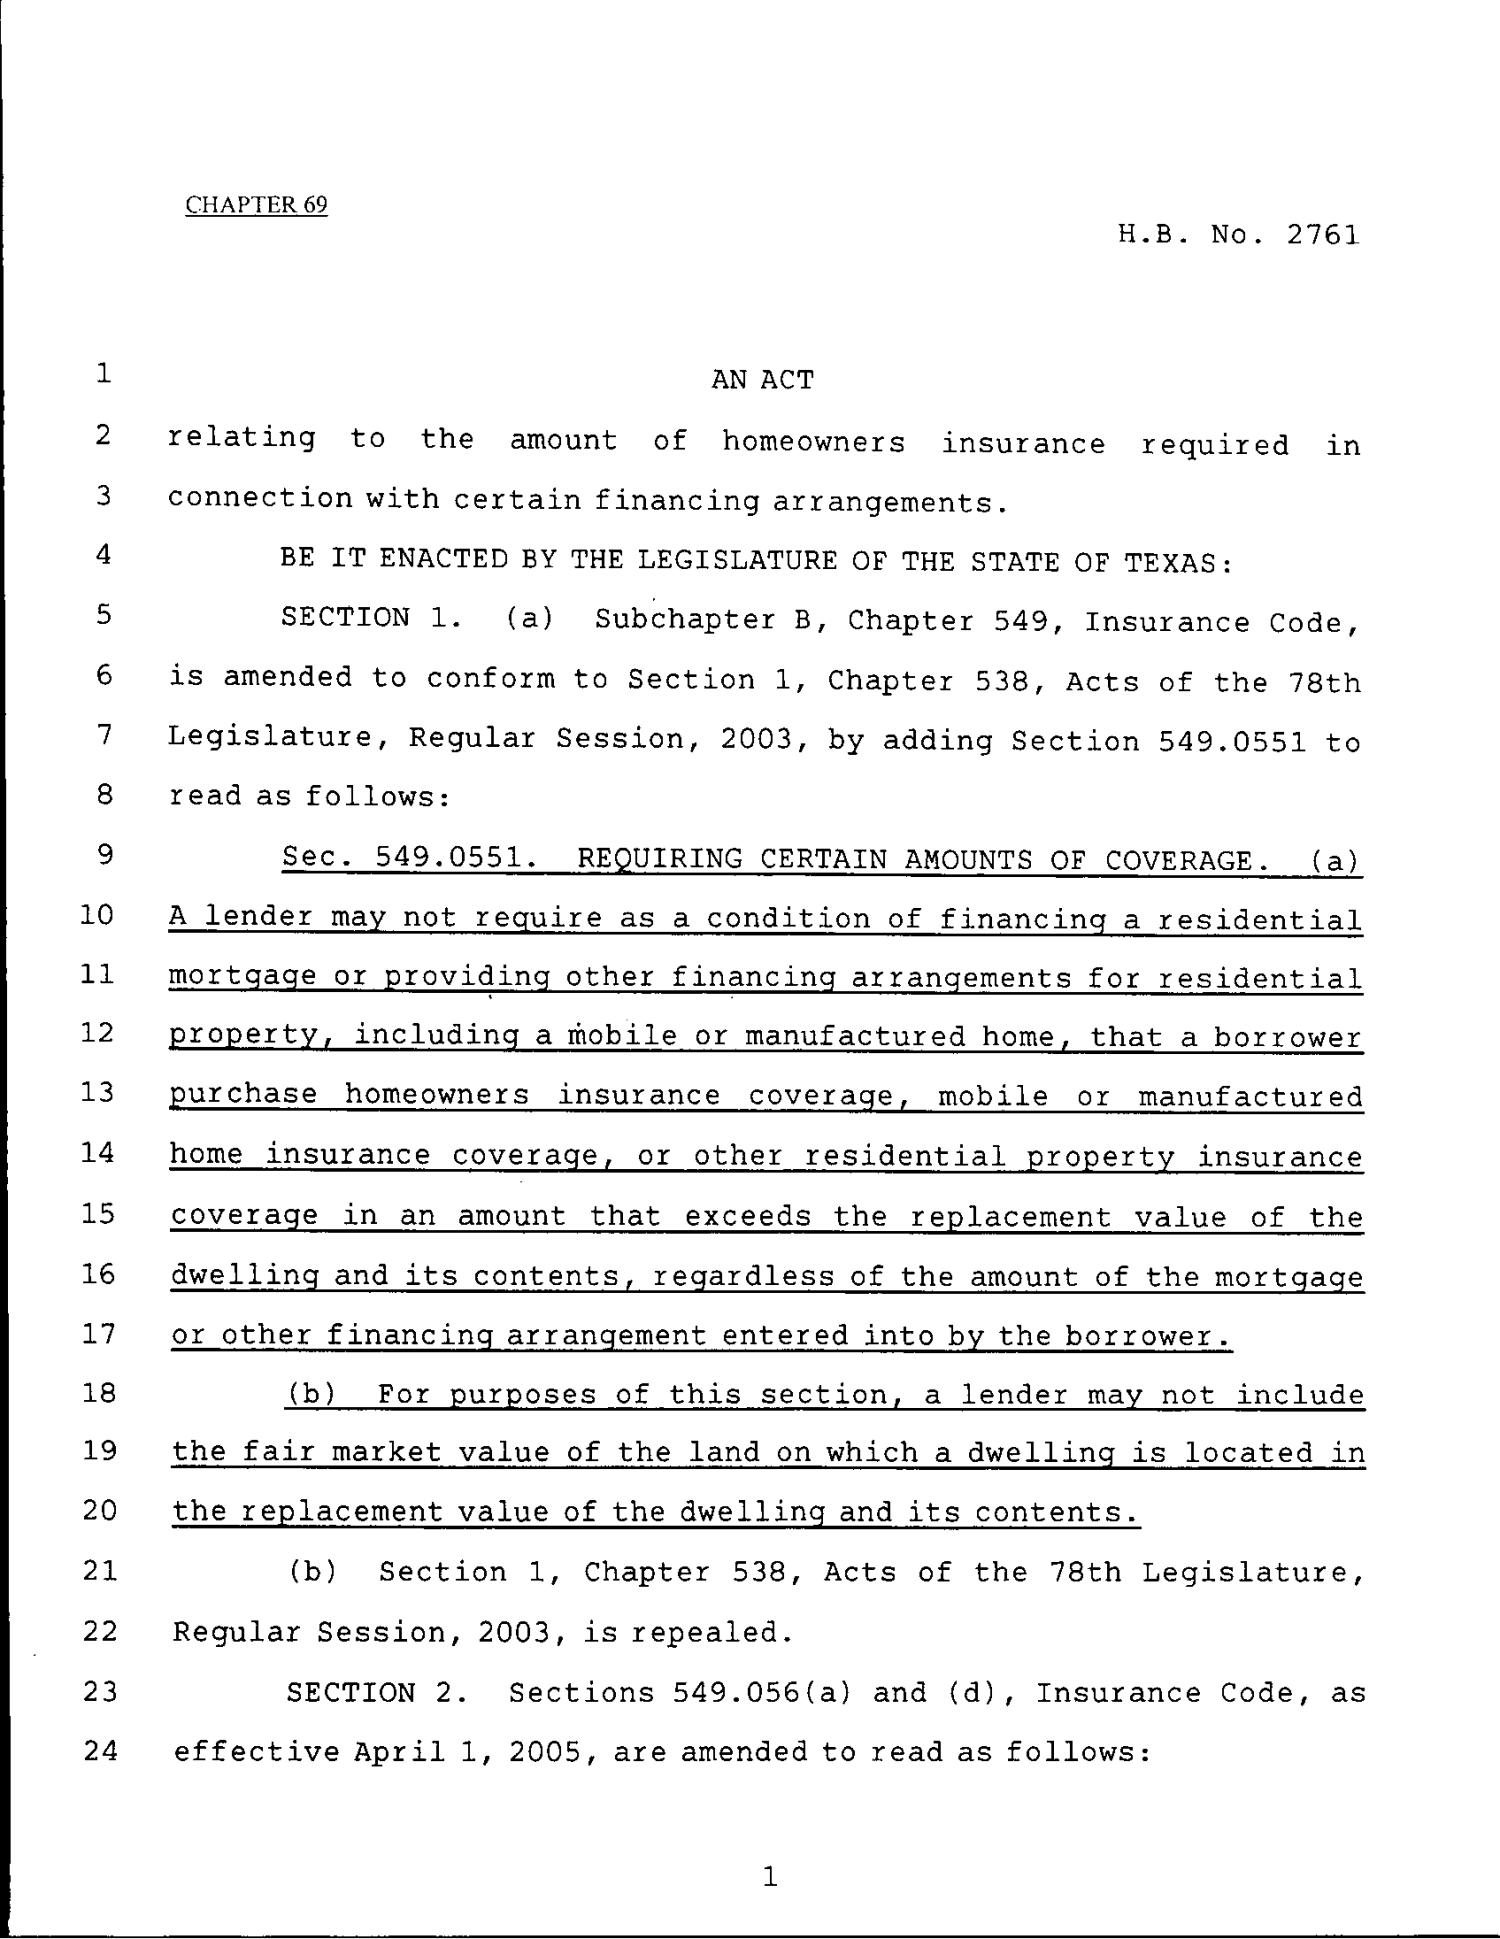 79th Texas Legislature, Regular Session, House Bill 2761, Chapter 69
                                                
                                                    [Sequence #]: 1 of 4
                                                